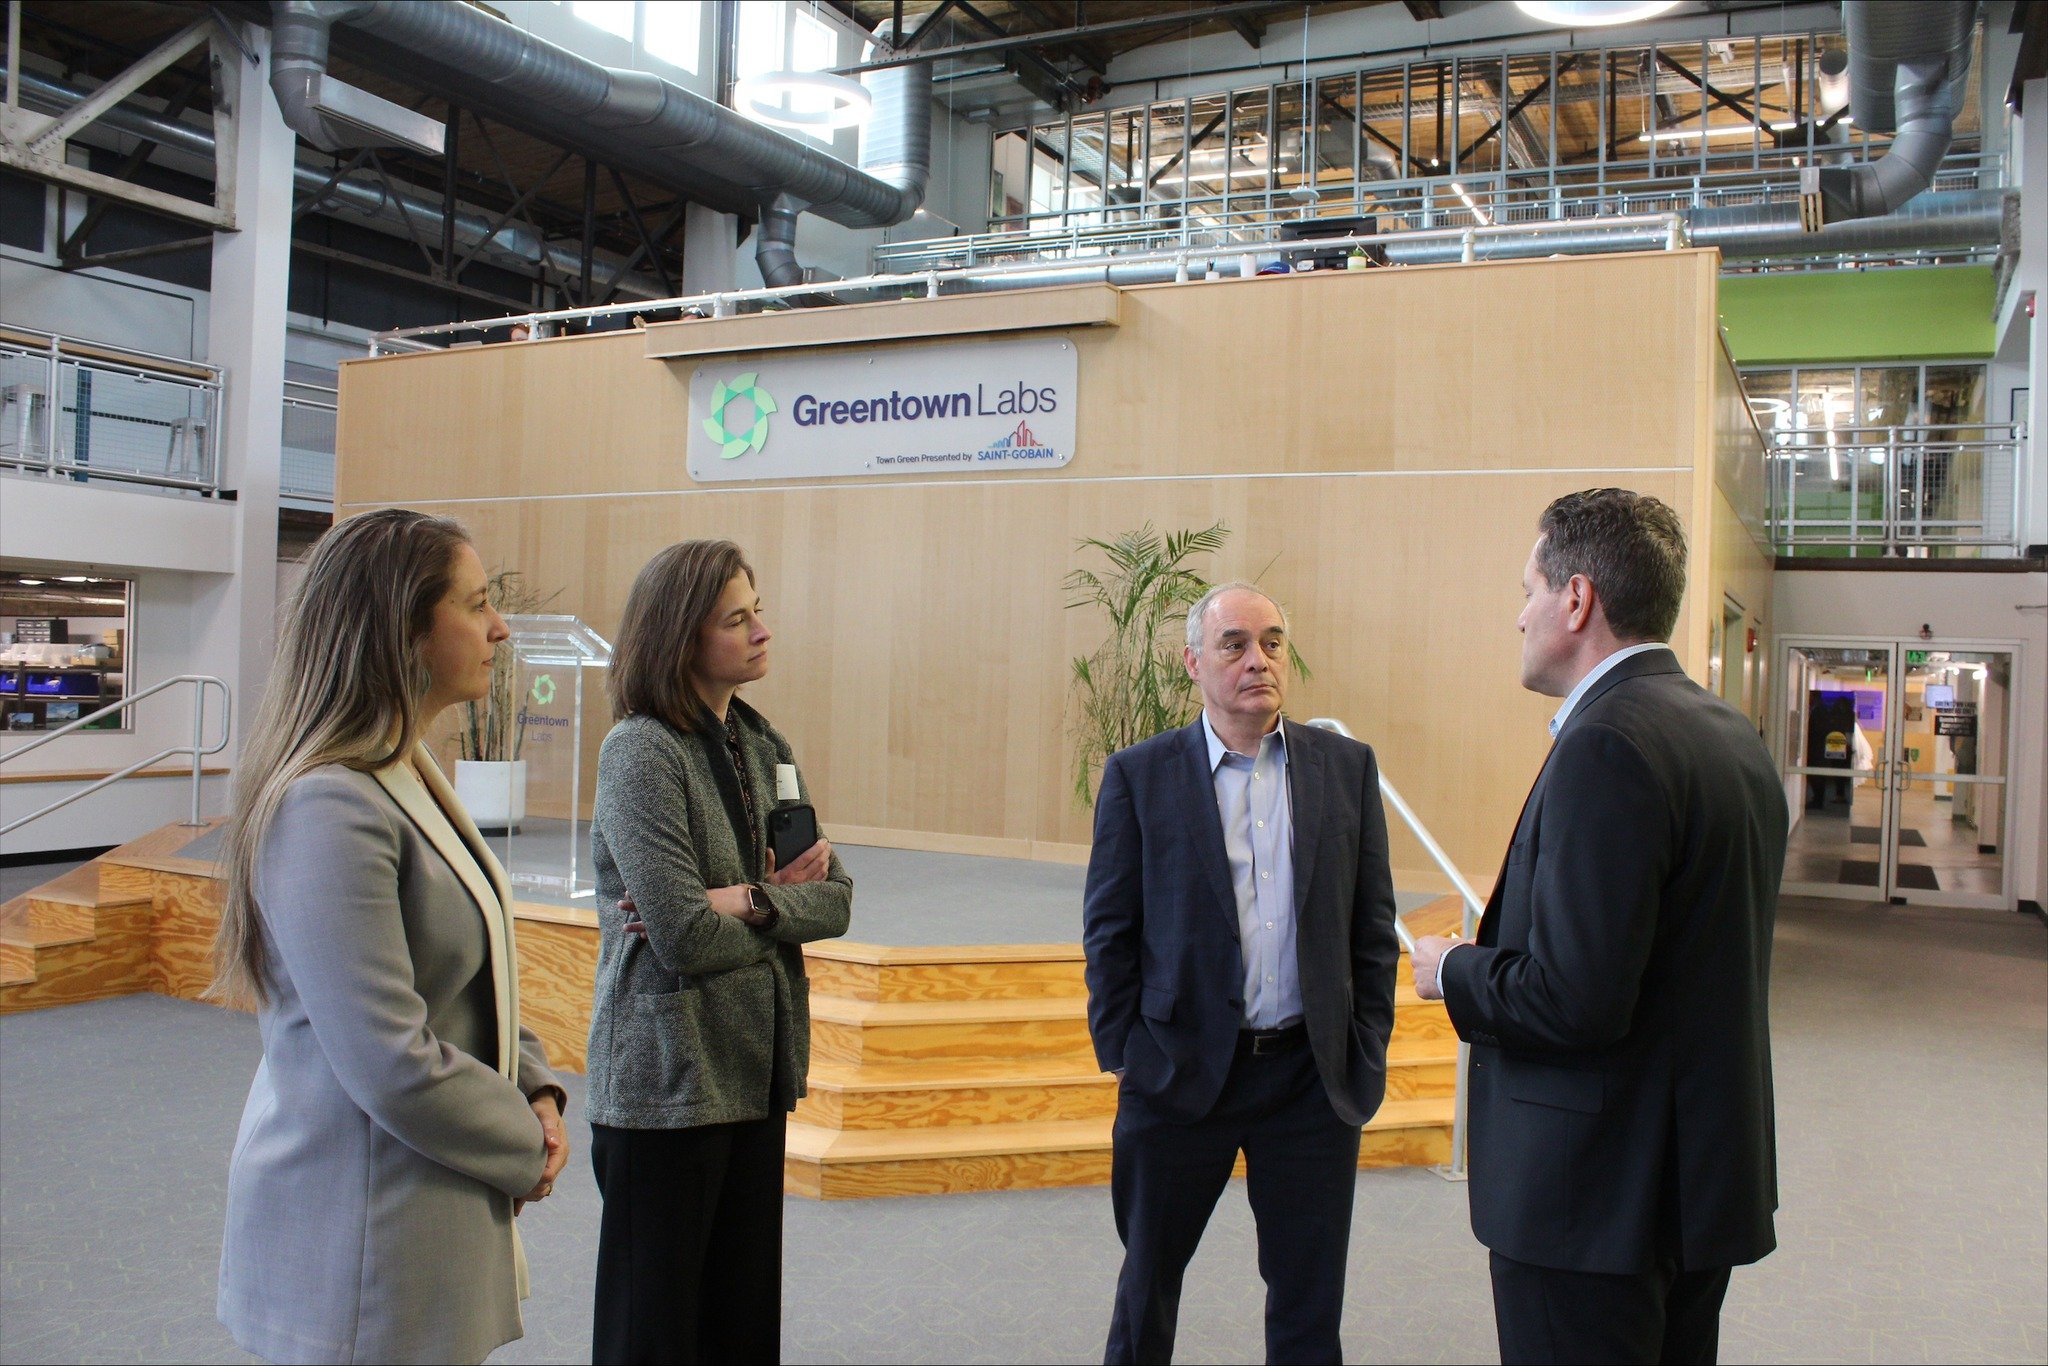 Addressing climate change requires bold solutions - and that's exactly what Greentown Labs is pioneering. 

I was grateful to learn more about the climate tech innovation Greentown fosters on a tour of their Boston facility earlier this week. This co